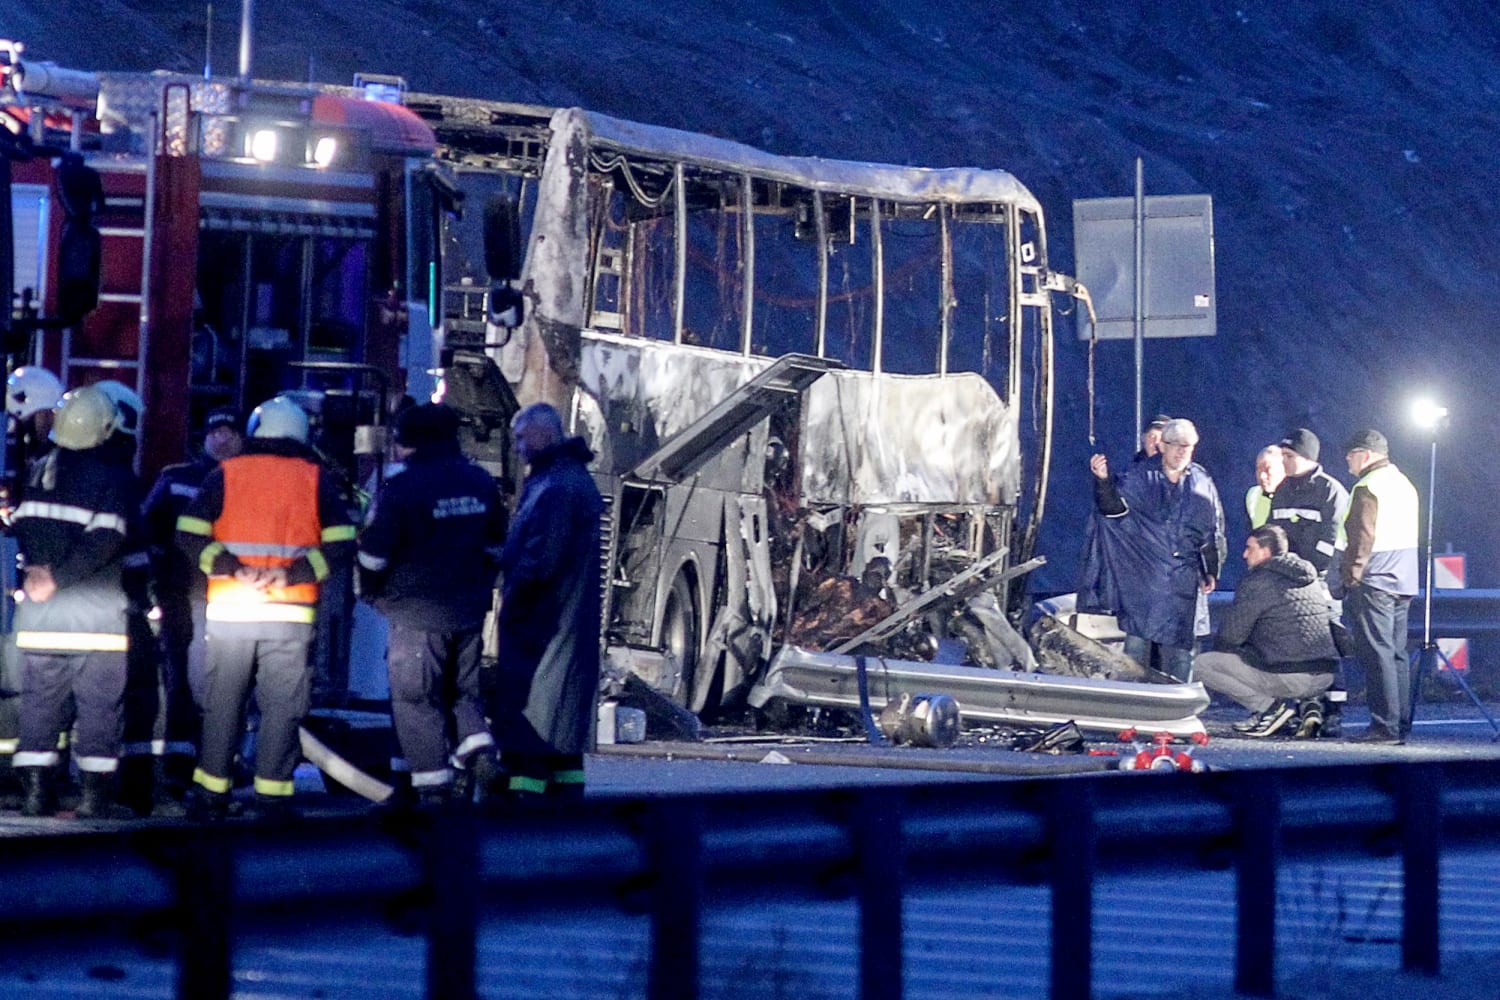 Bus carrying tourists crashes in flames in Bulgaria, killing 45